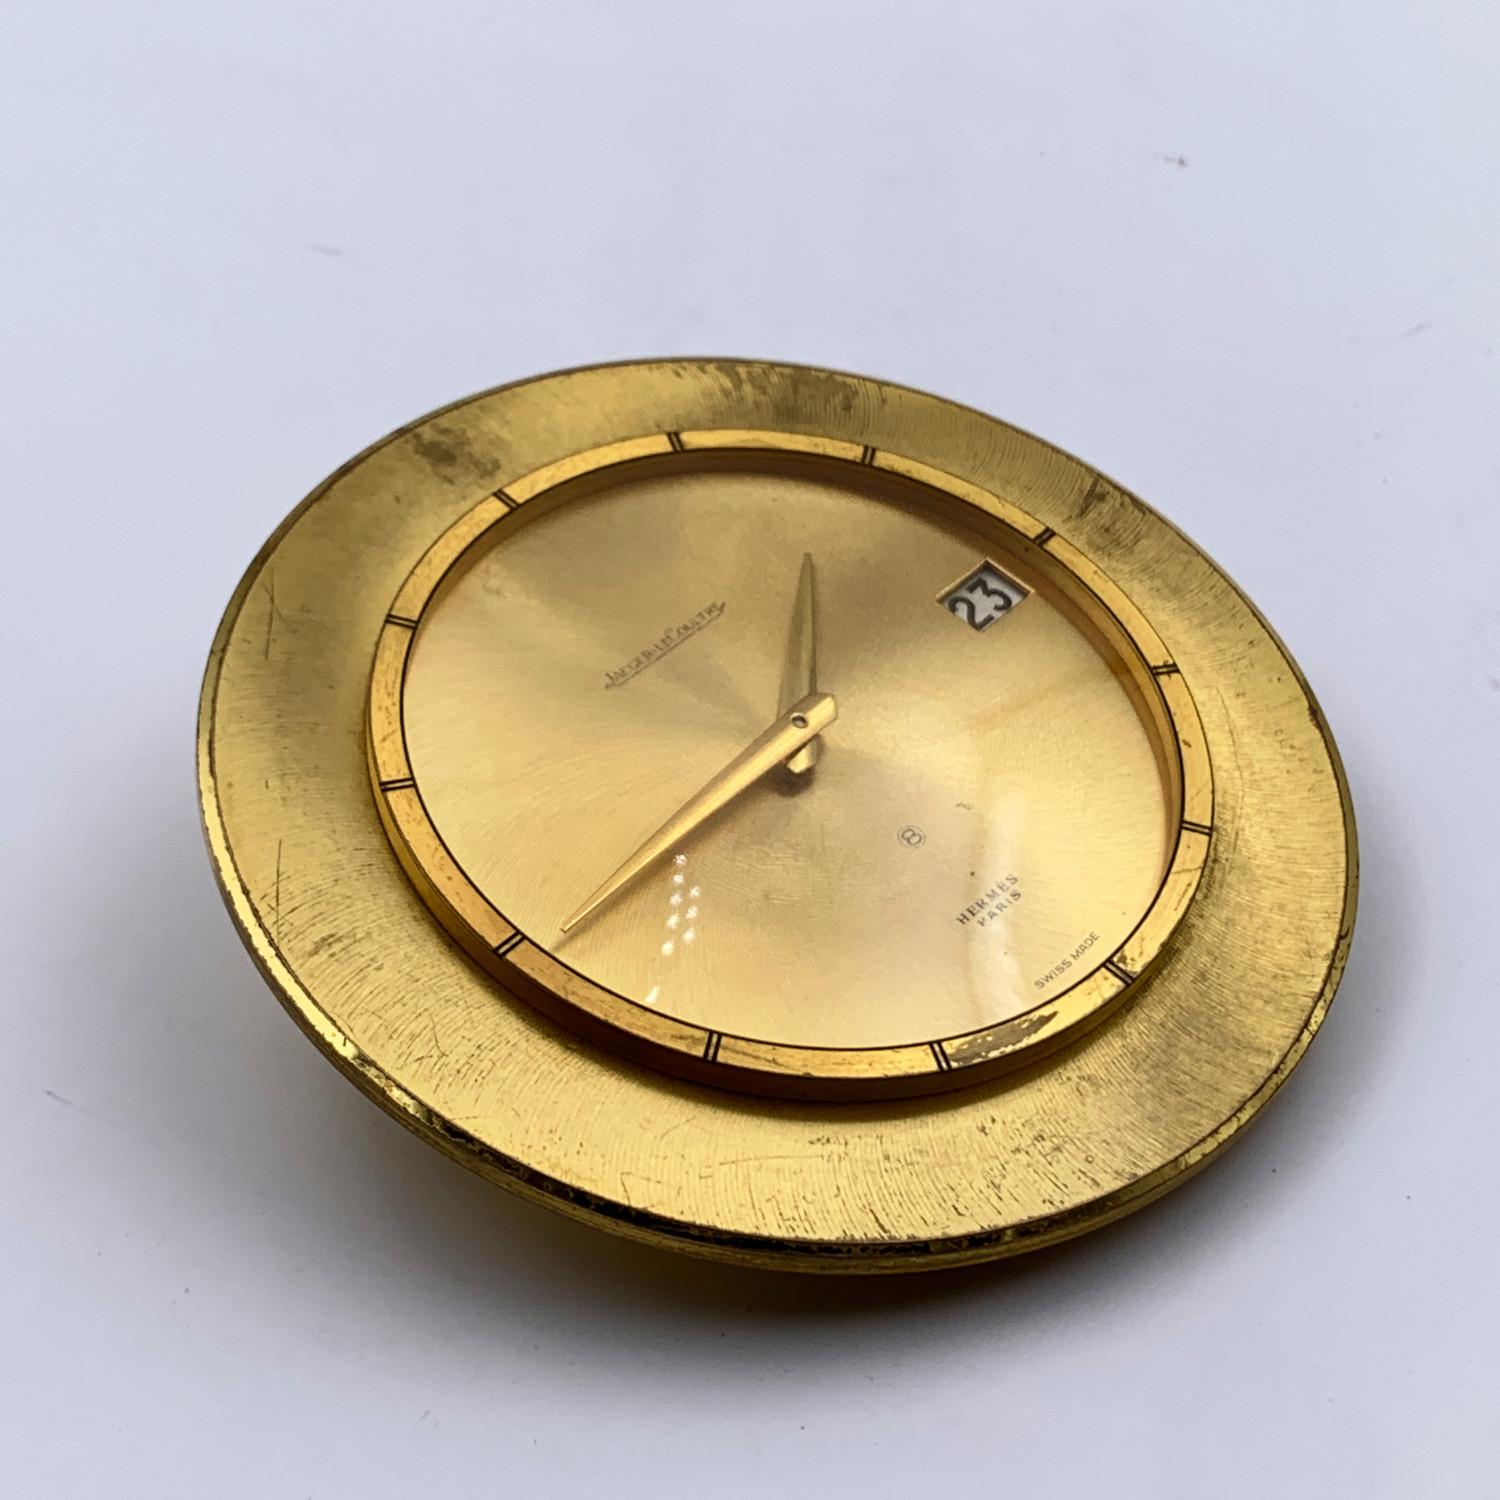 Jaeger LeCoutre for Hermes Vintage gold metal Desk Clock from the mid-century. Round-shaped. Mechanical movement- Swiss Made. Date indicator at 3. It is marked 'Hermes Paris' and 'Jaeger LeCoutre' on the dial. Diameter: 5 inches - 12.7